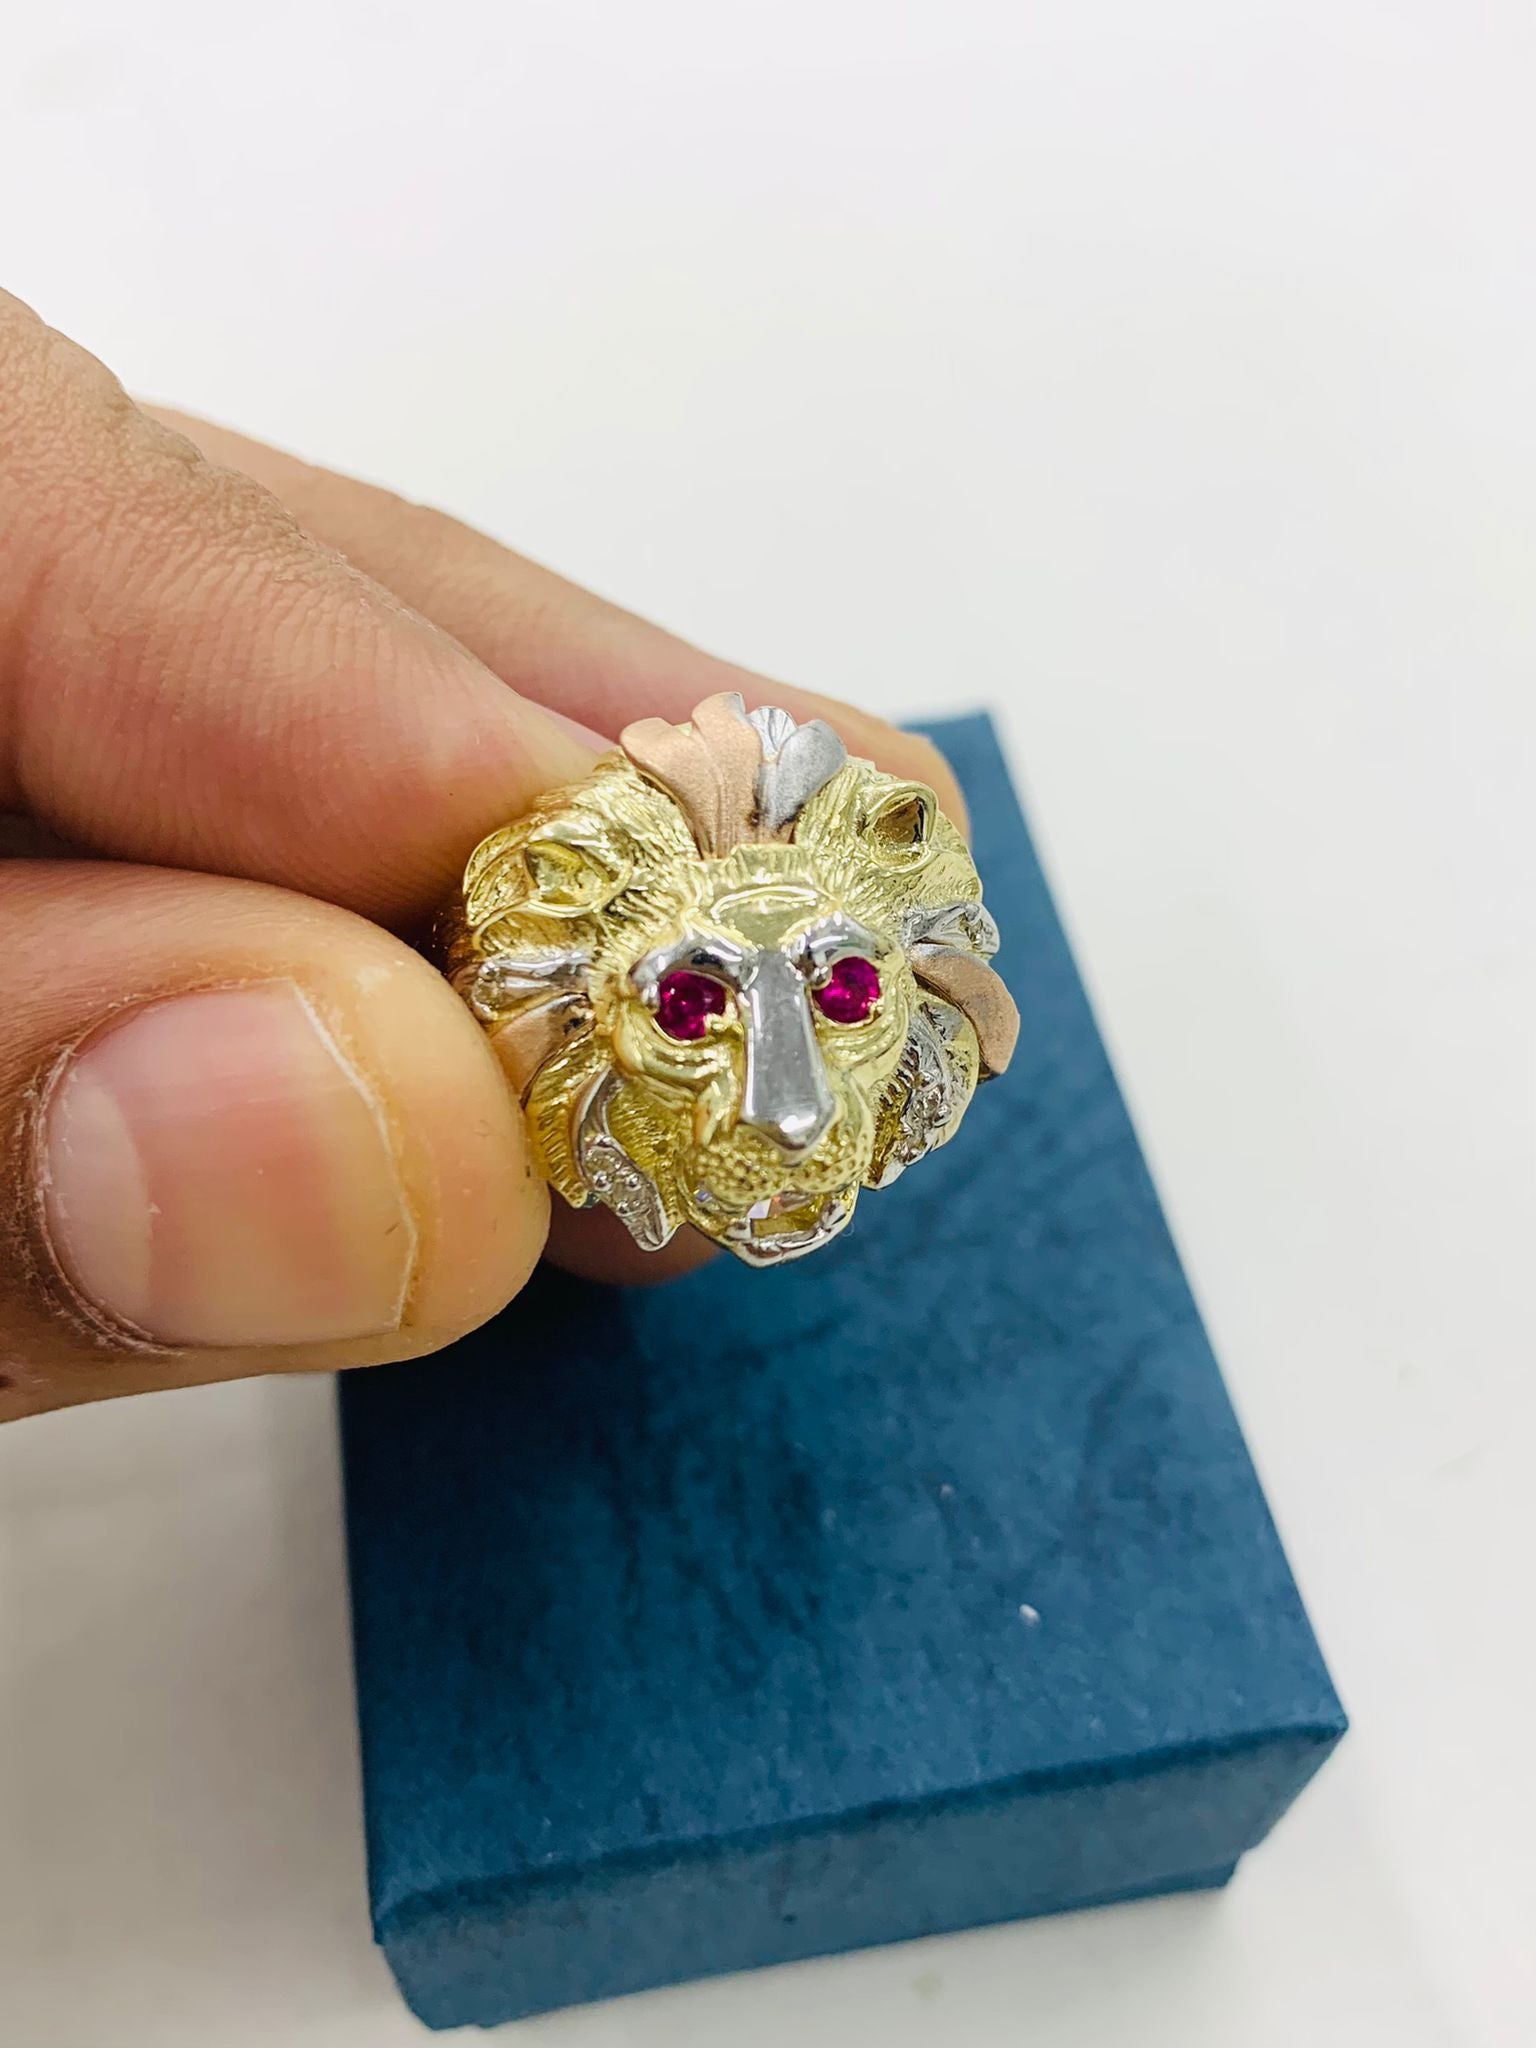 1 Gram Gold Forming Lion Face Latest Design High-quality Ring For Men -  Style A979 at Rs 2260.00 | सोने की अंगूठी - Soni Fashion, Rajkot | ID:  27602672491